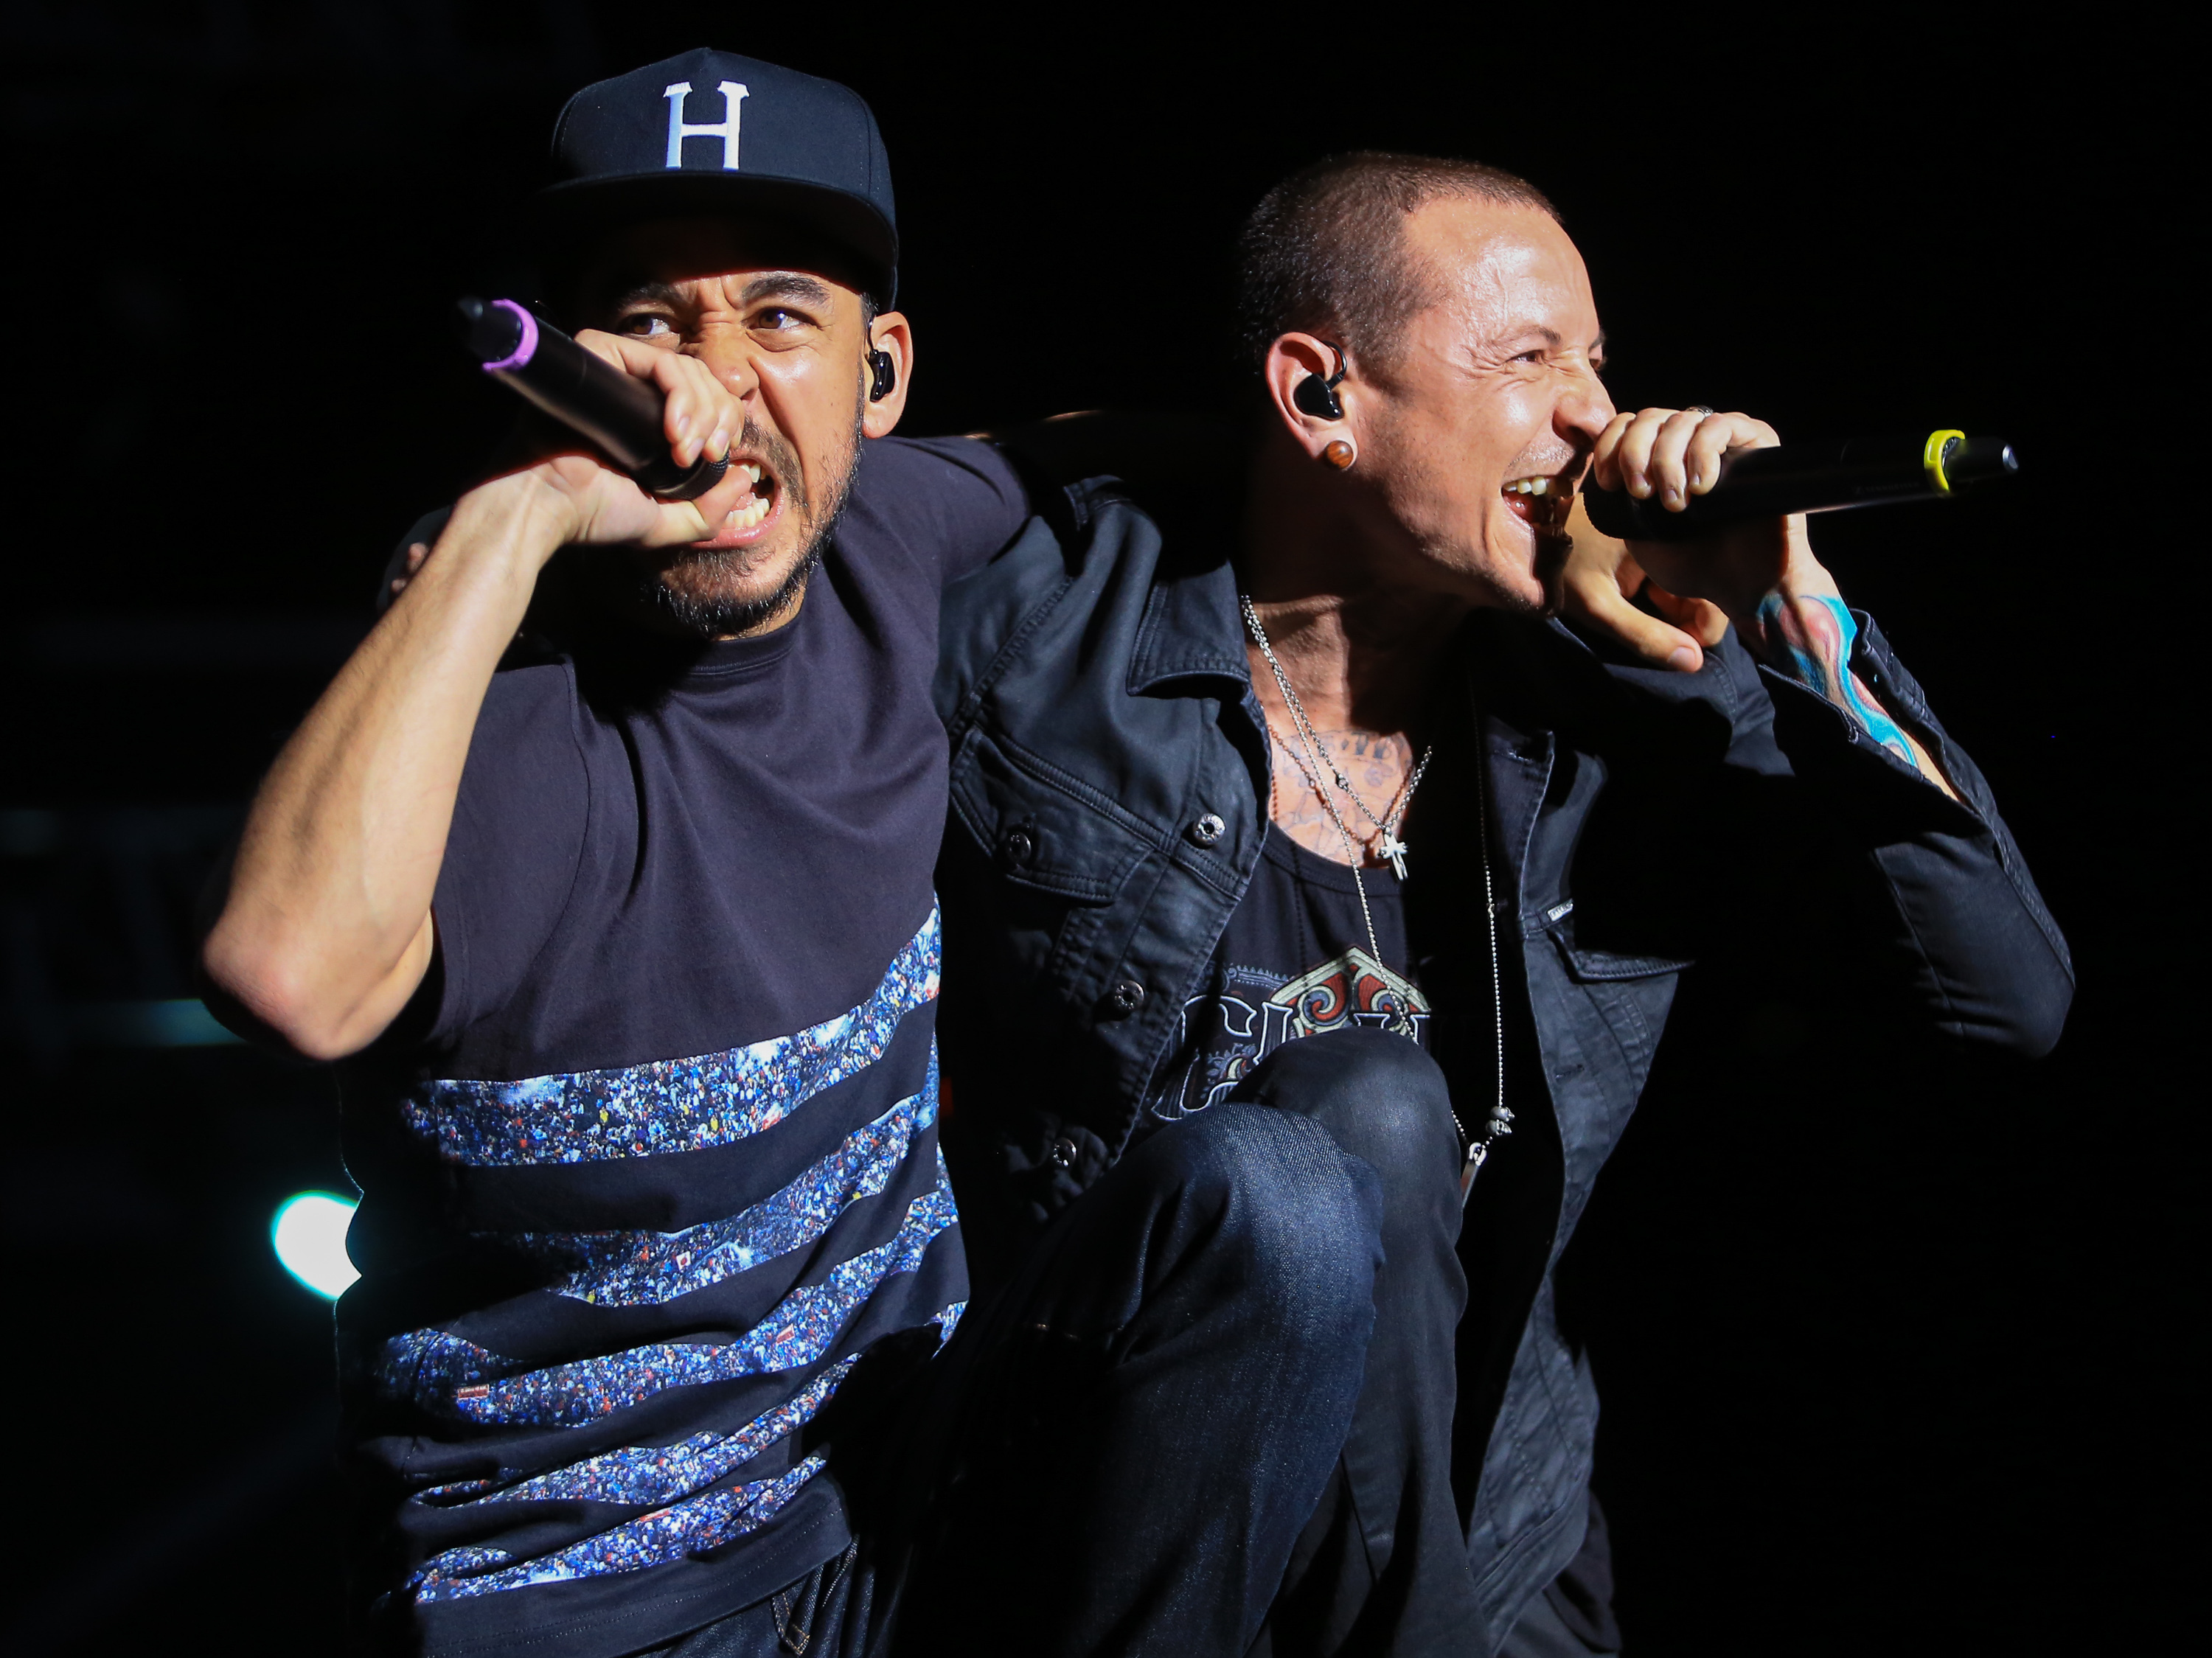 Musicians Mike Shinoda and Chester Bennington of Linkin Park perform at MAPFRE Stadium on May 17, 2015 in Columbus, Ohio. (Jason Squires—WireImage)